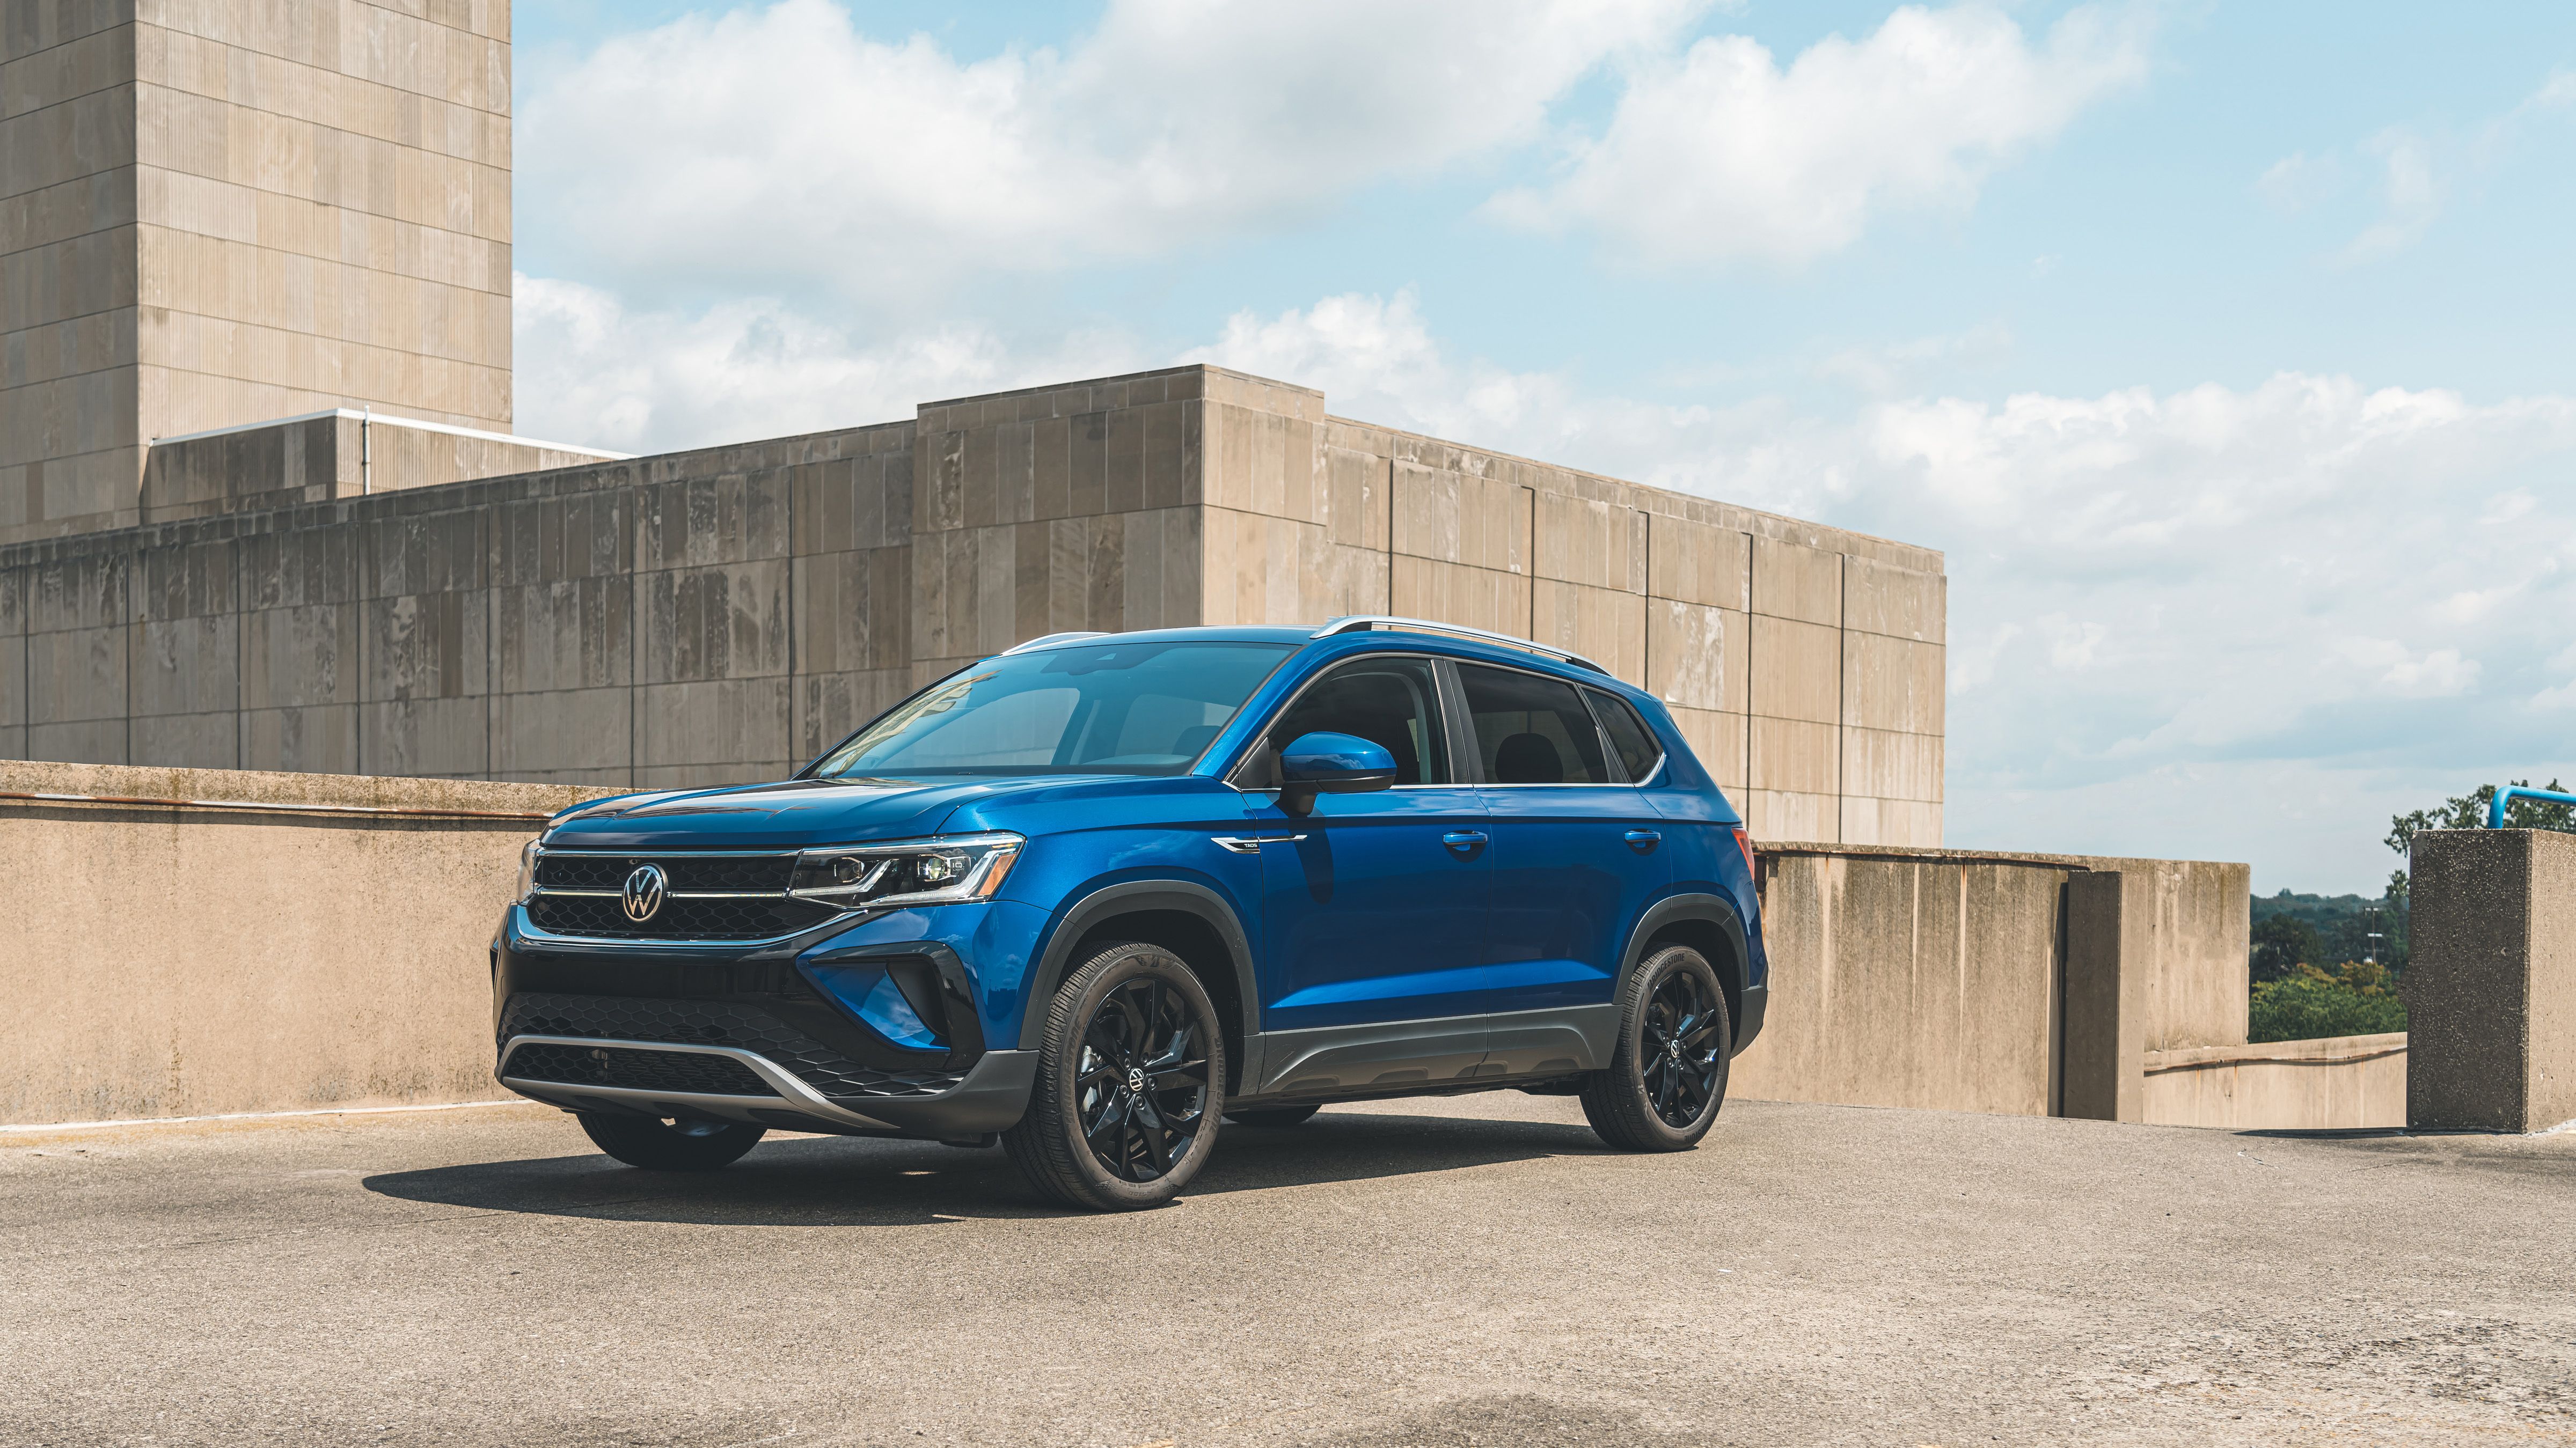 Atlas zout Reductor Tested: 2022 Volkswagen Taos Plays Big Among Subcompact SUVs